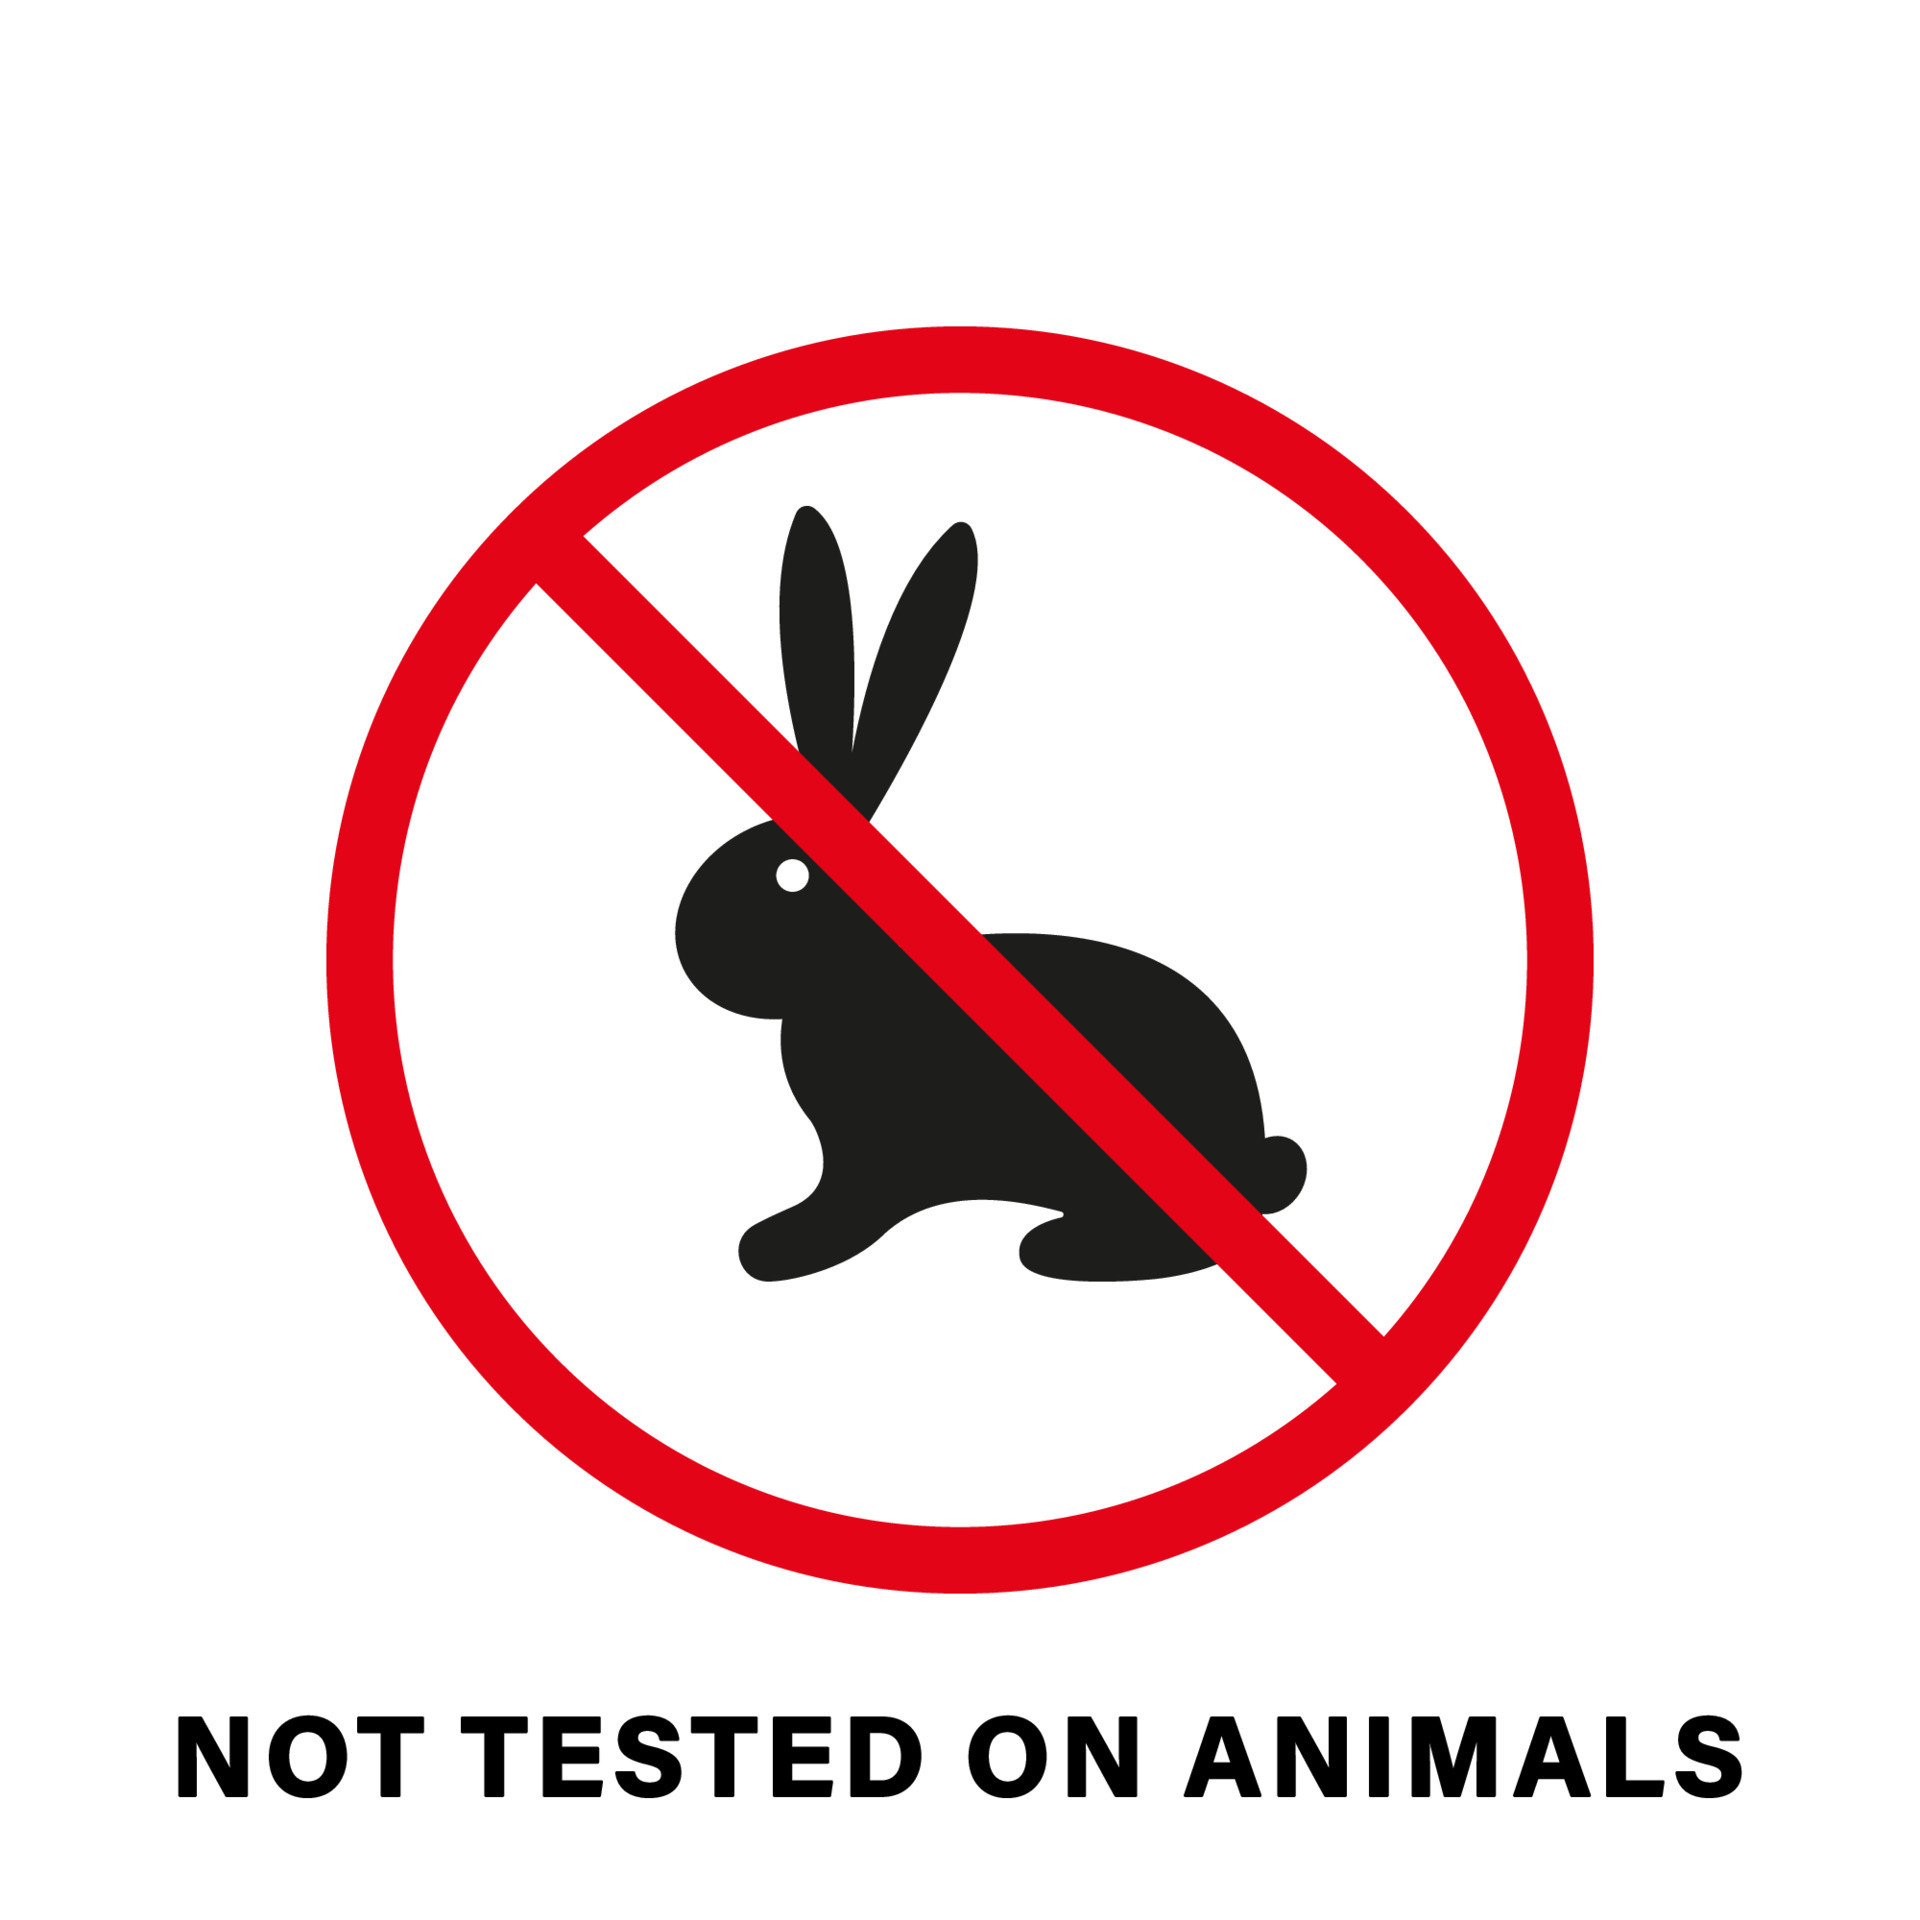 No Tested on Animals, Cruelty Free Silhouette Icon. Bunny and Stop Sign Not  Trial Animals Stamp. Stop Torture Symbol. Cosmetic Product No Test on Hare.  No Cruelty. Isolated Vector Illustration. 9008904 Vector